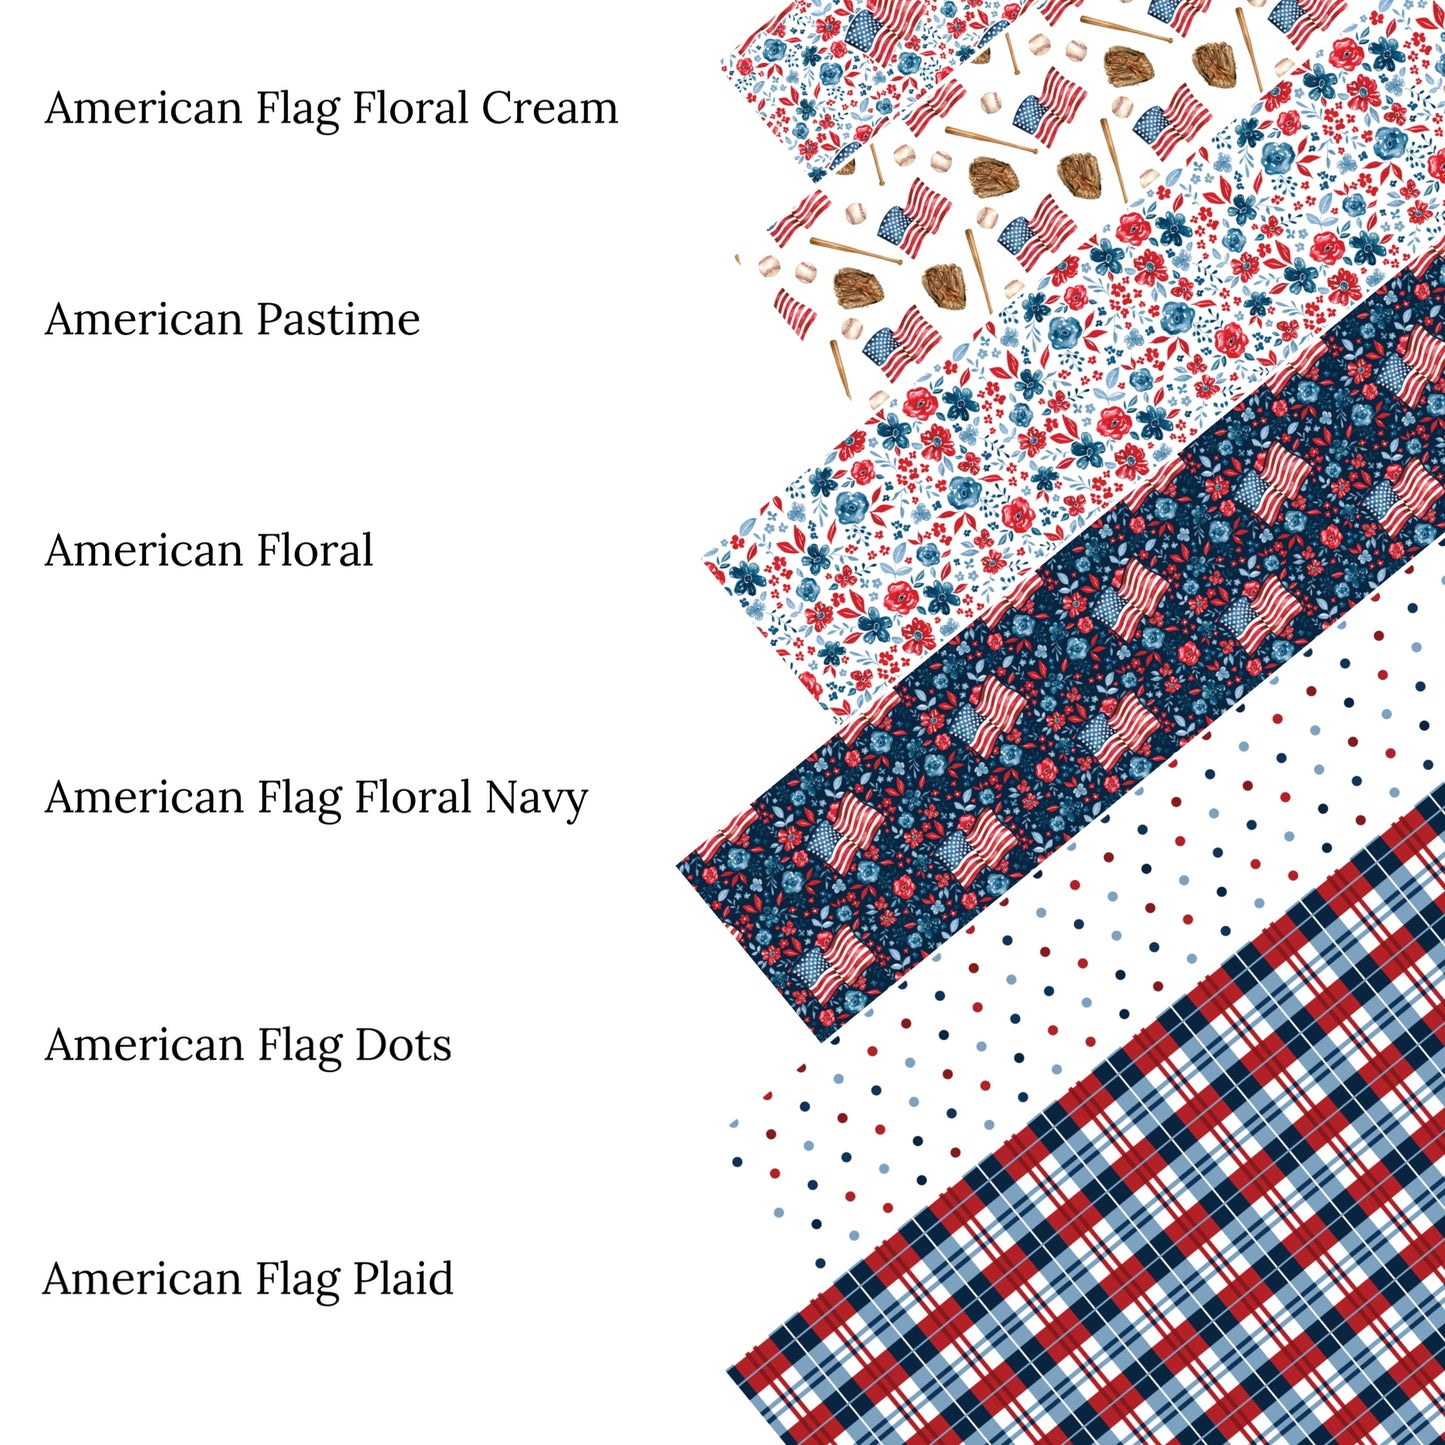 American Flag Floral Cream Faux Leather Sheets